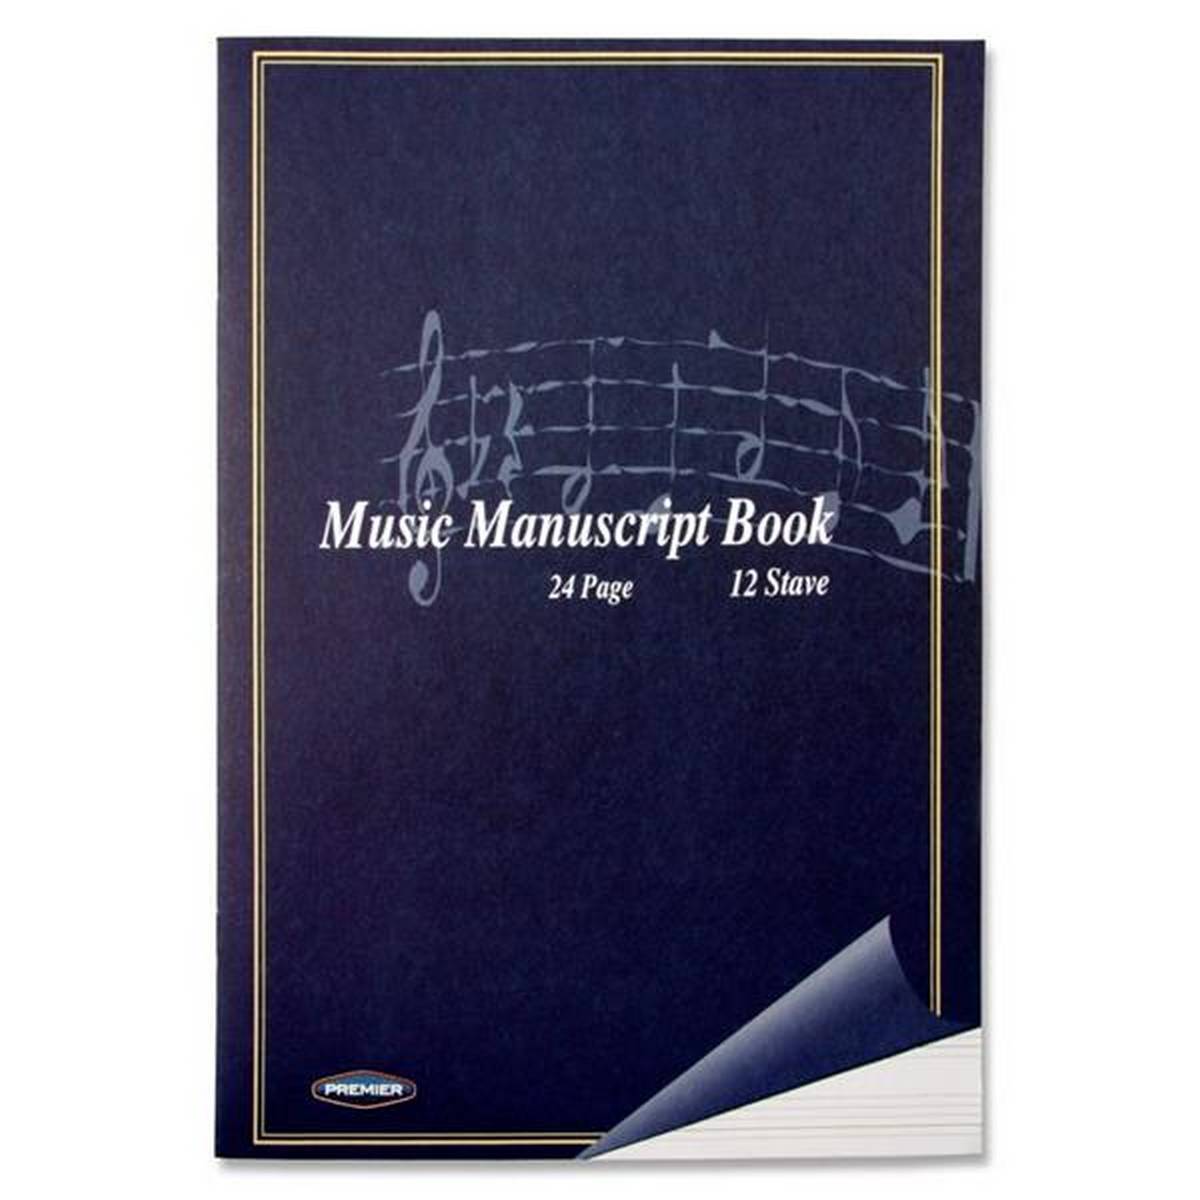 Pack of 6 A4 Size Premier Quality 24pg 12 Stave Music Manuscript Book 